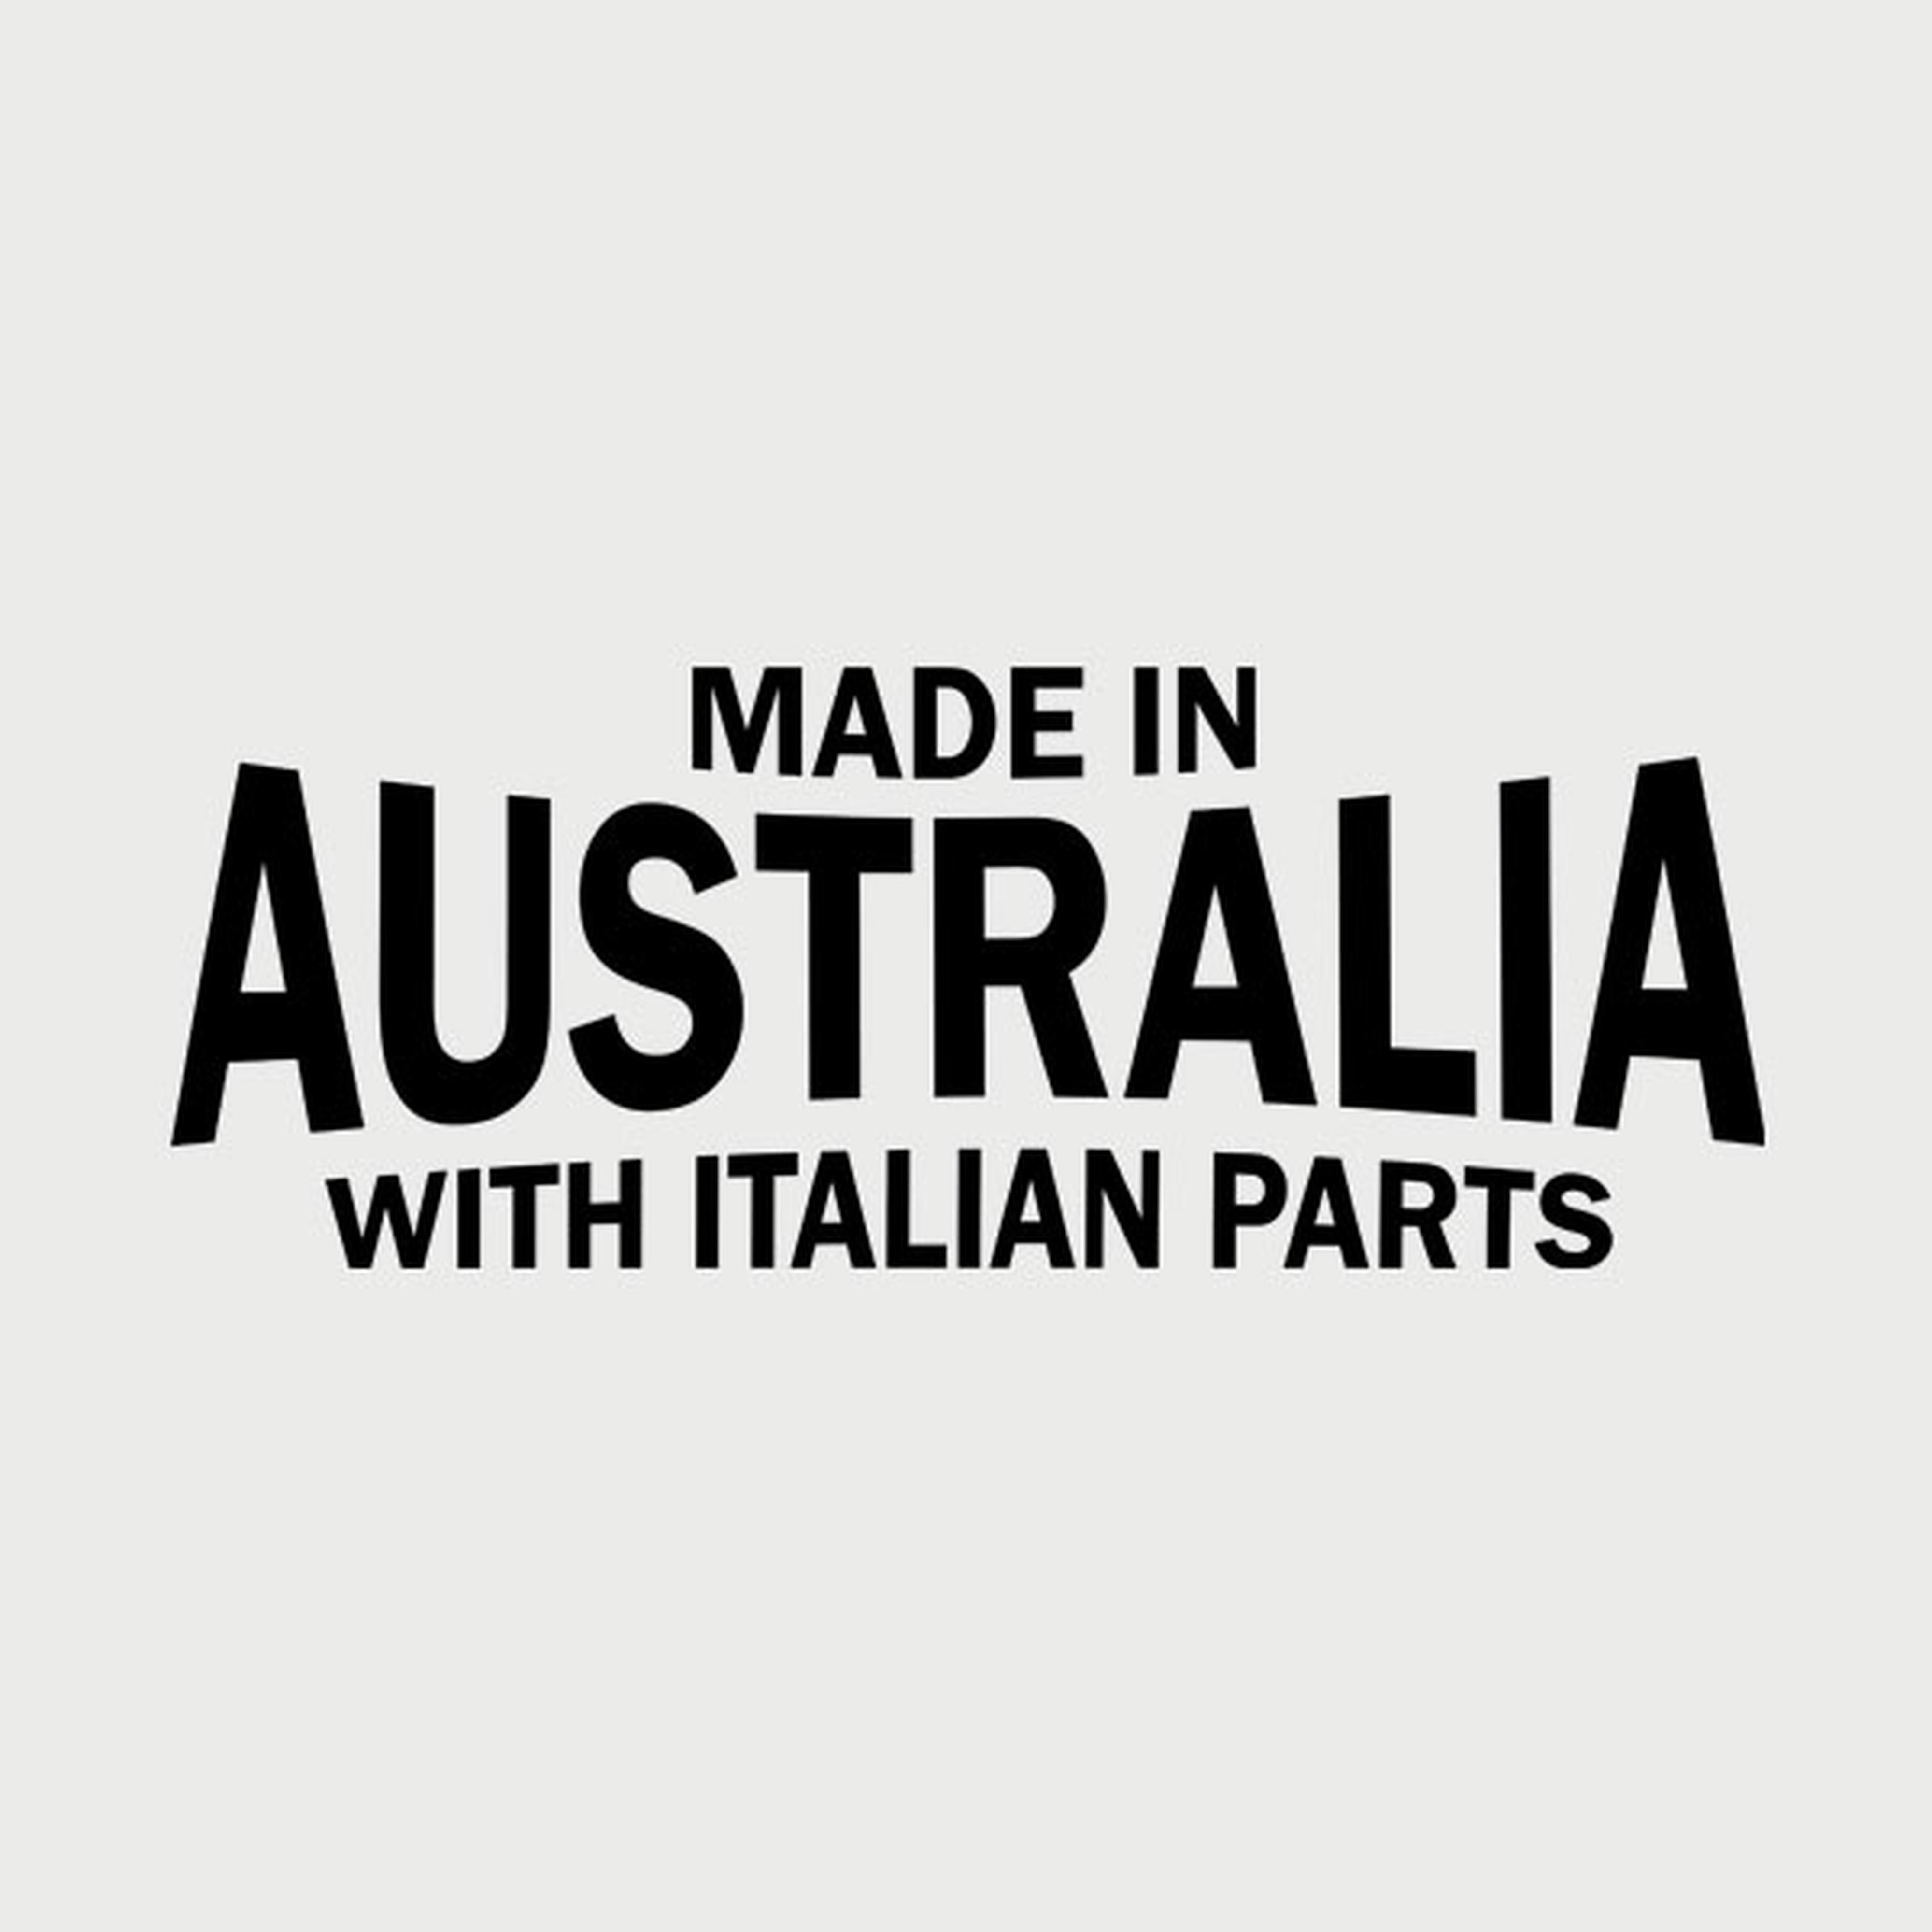 Made in Australia with Italian parts - T-shirt